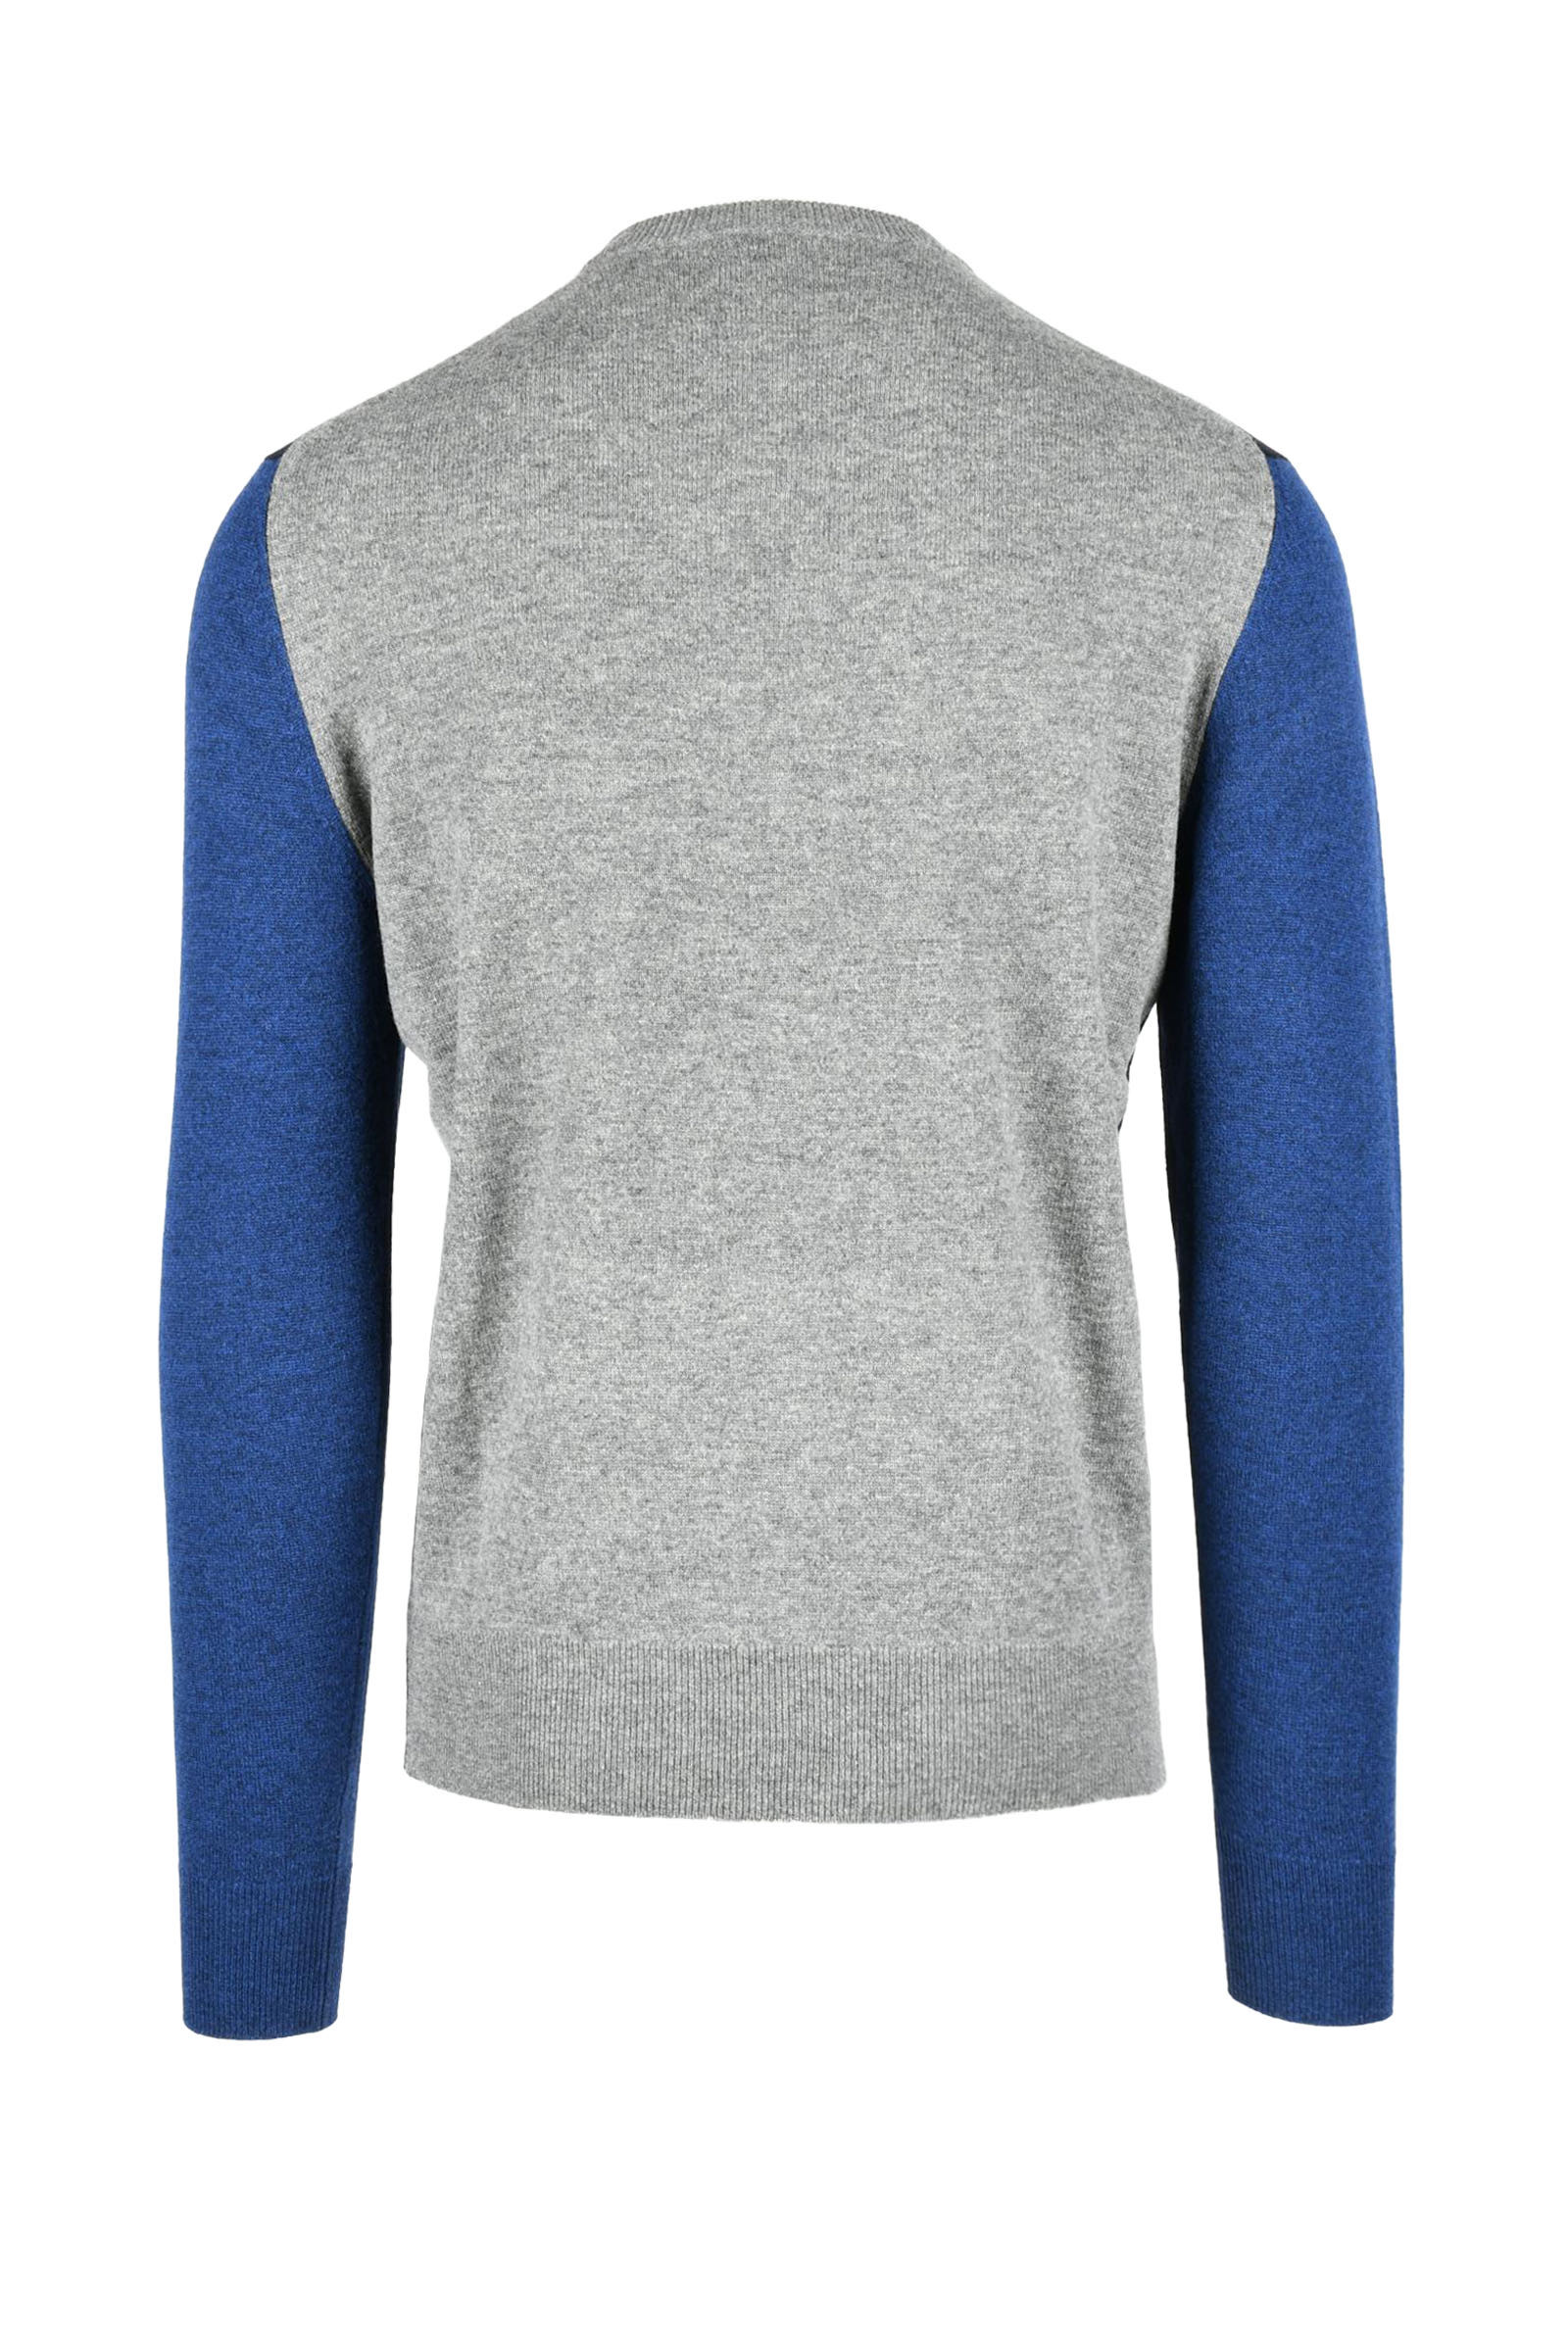 Wool Knitwear with Long Sleeves and Round Neck